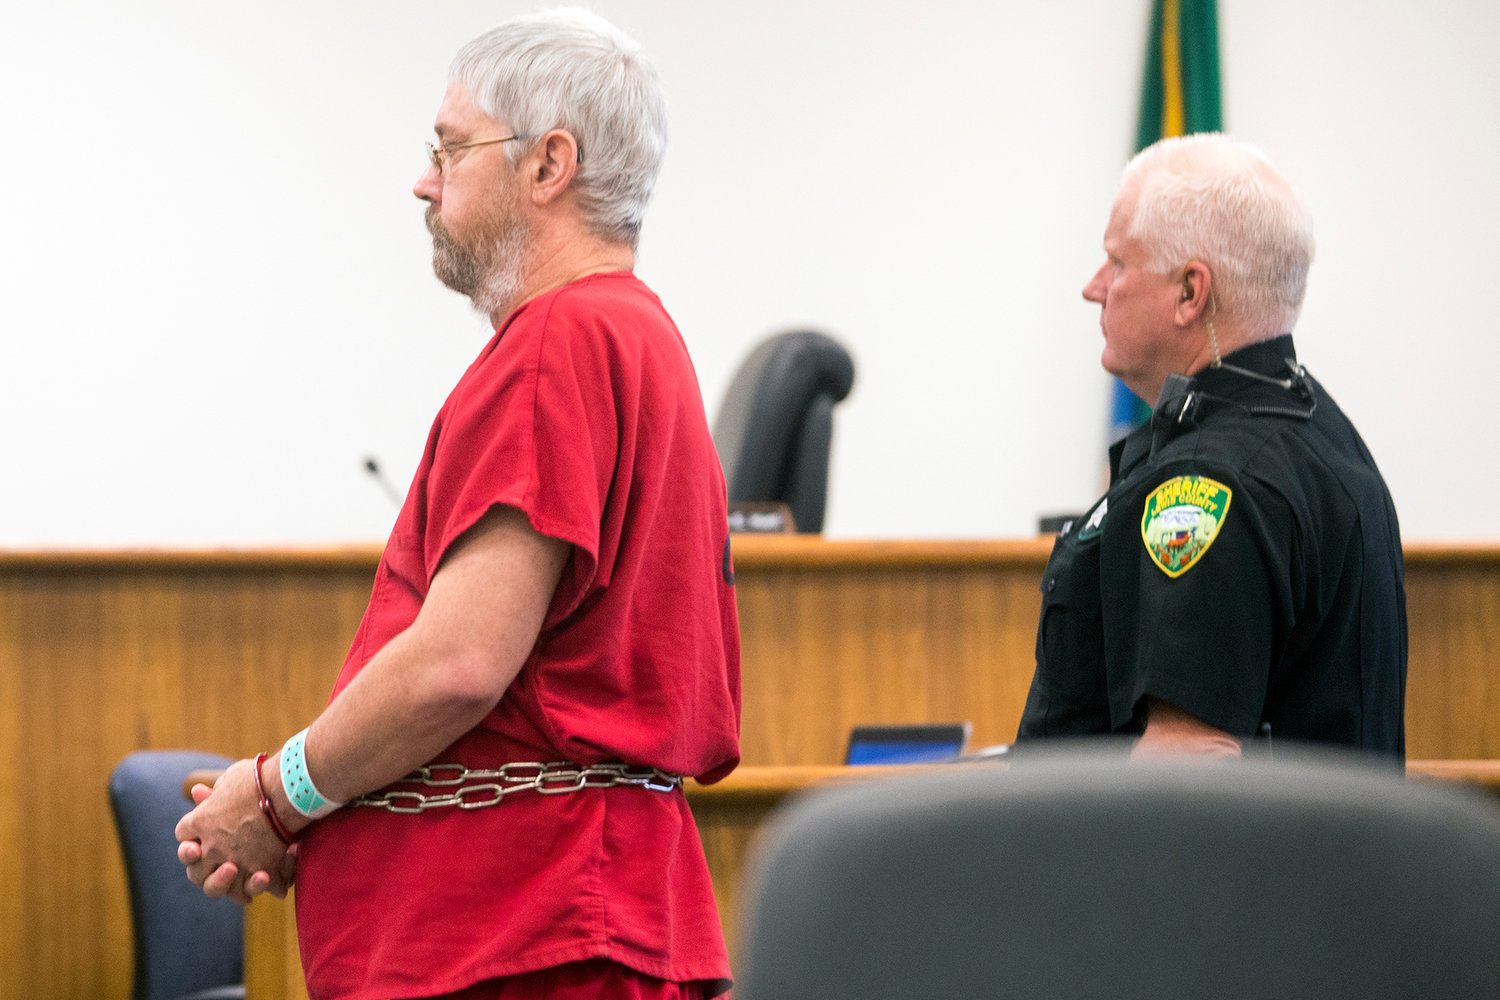 Rick Riffe walks out of a Lewis County Superior Courtroom after his sentencing hearing on Monday afternoon at the Lewis County Law and Justice Center in Chehalis.